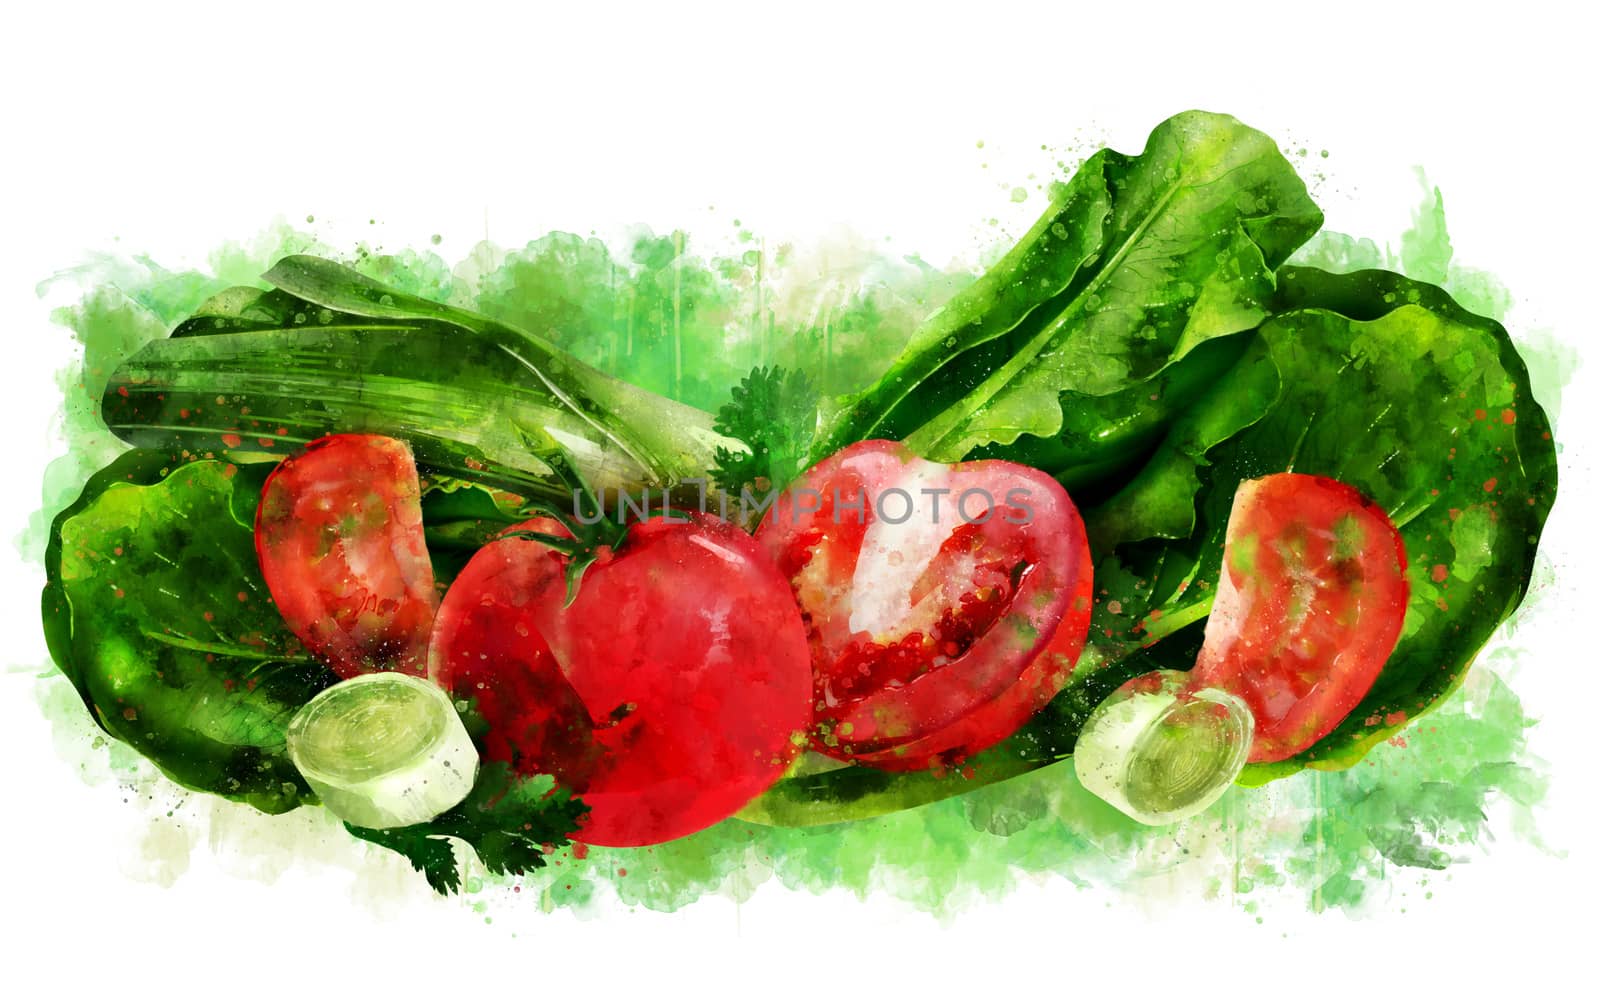 Tomato, cucumber and salad hand-painted illustration on a white background